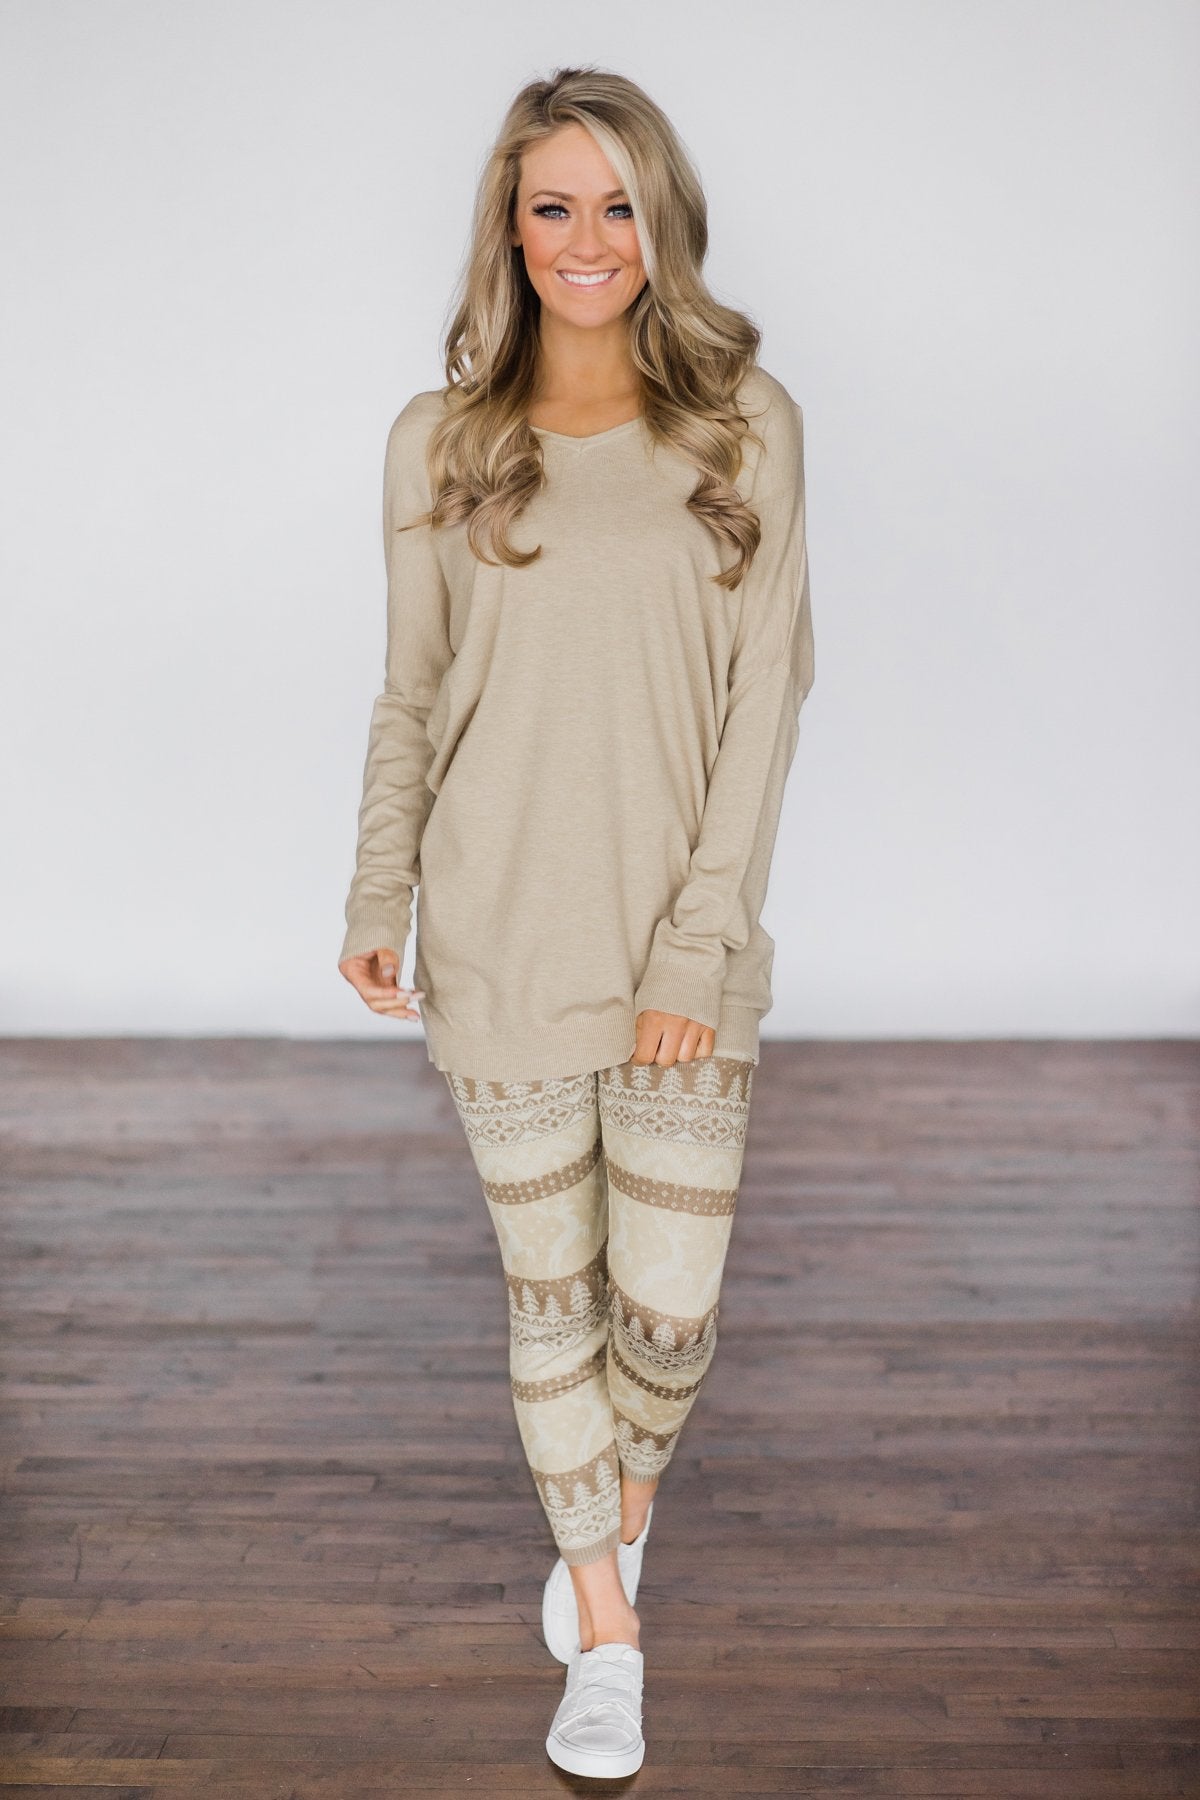 Prancing through the Snow ~ Tan Holiday Leggings – The Pulse Boutique